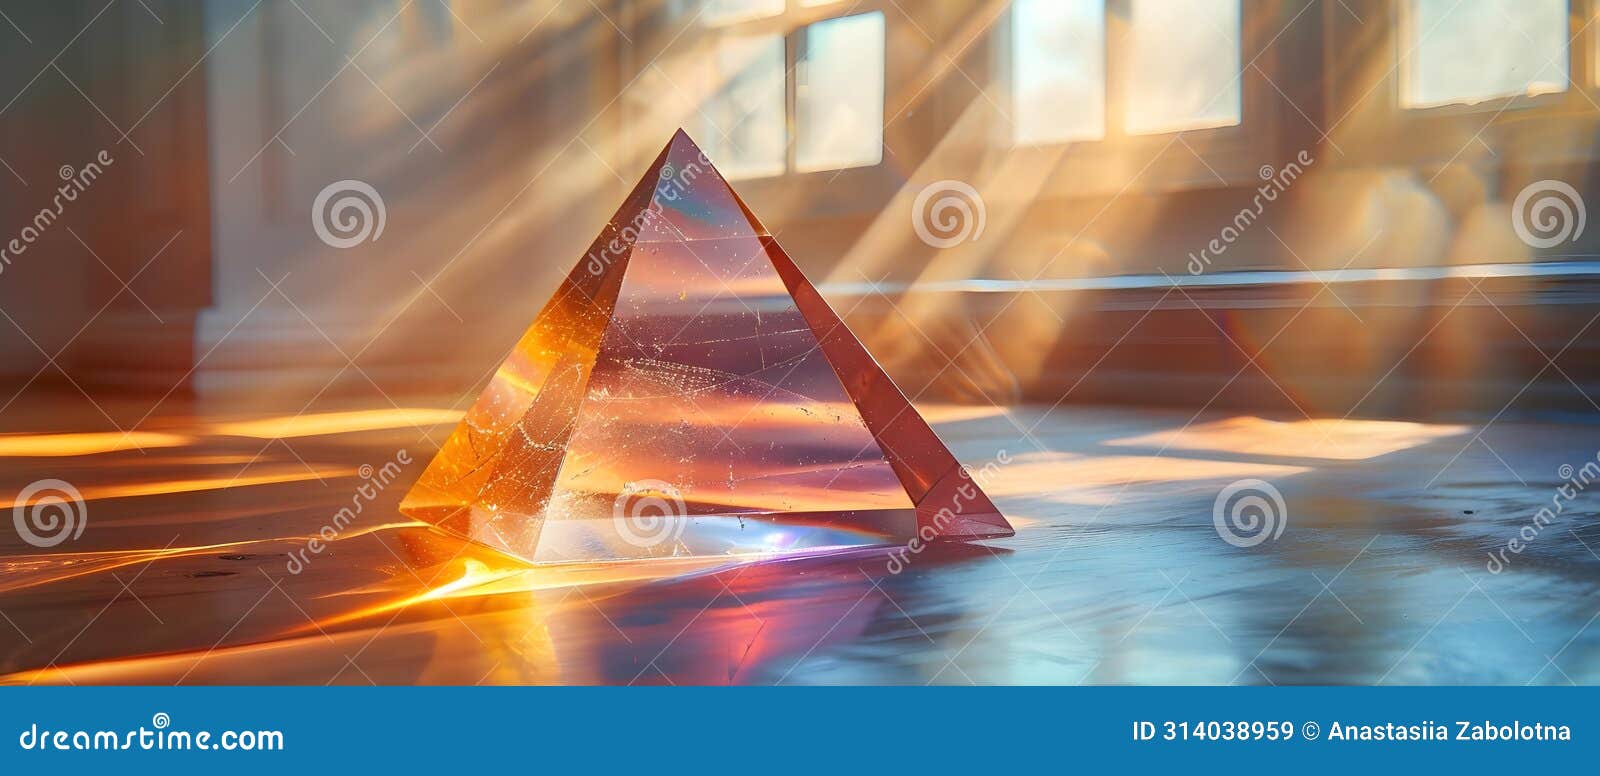 glass s refract light creating a colorful spectrum reflection on geometric objects. concept